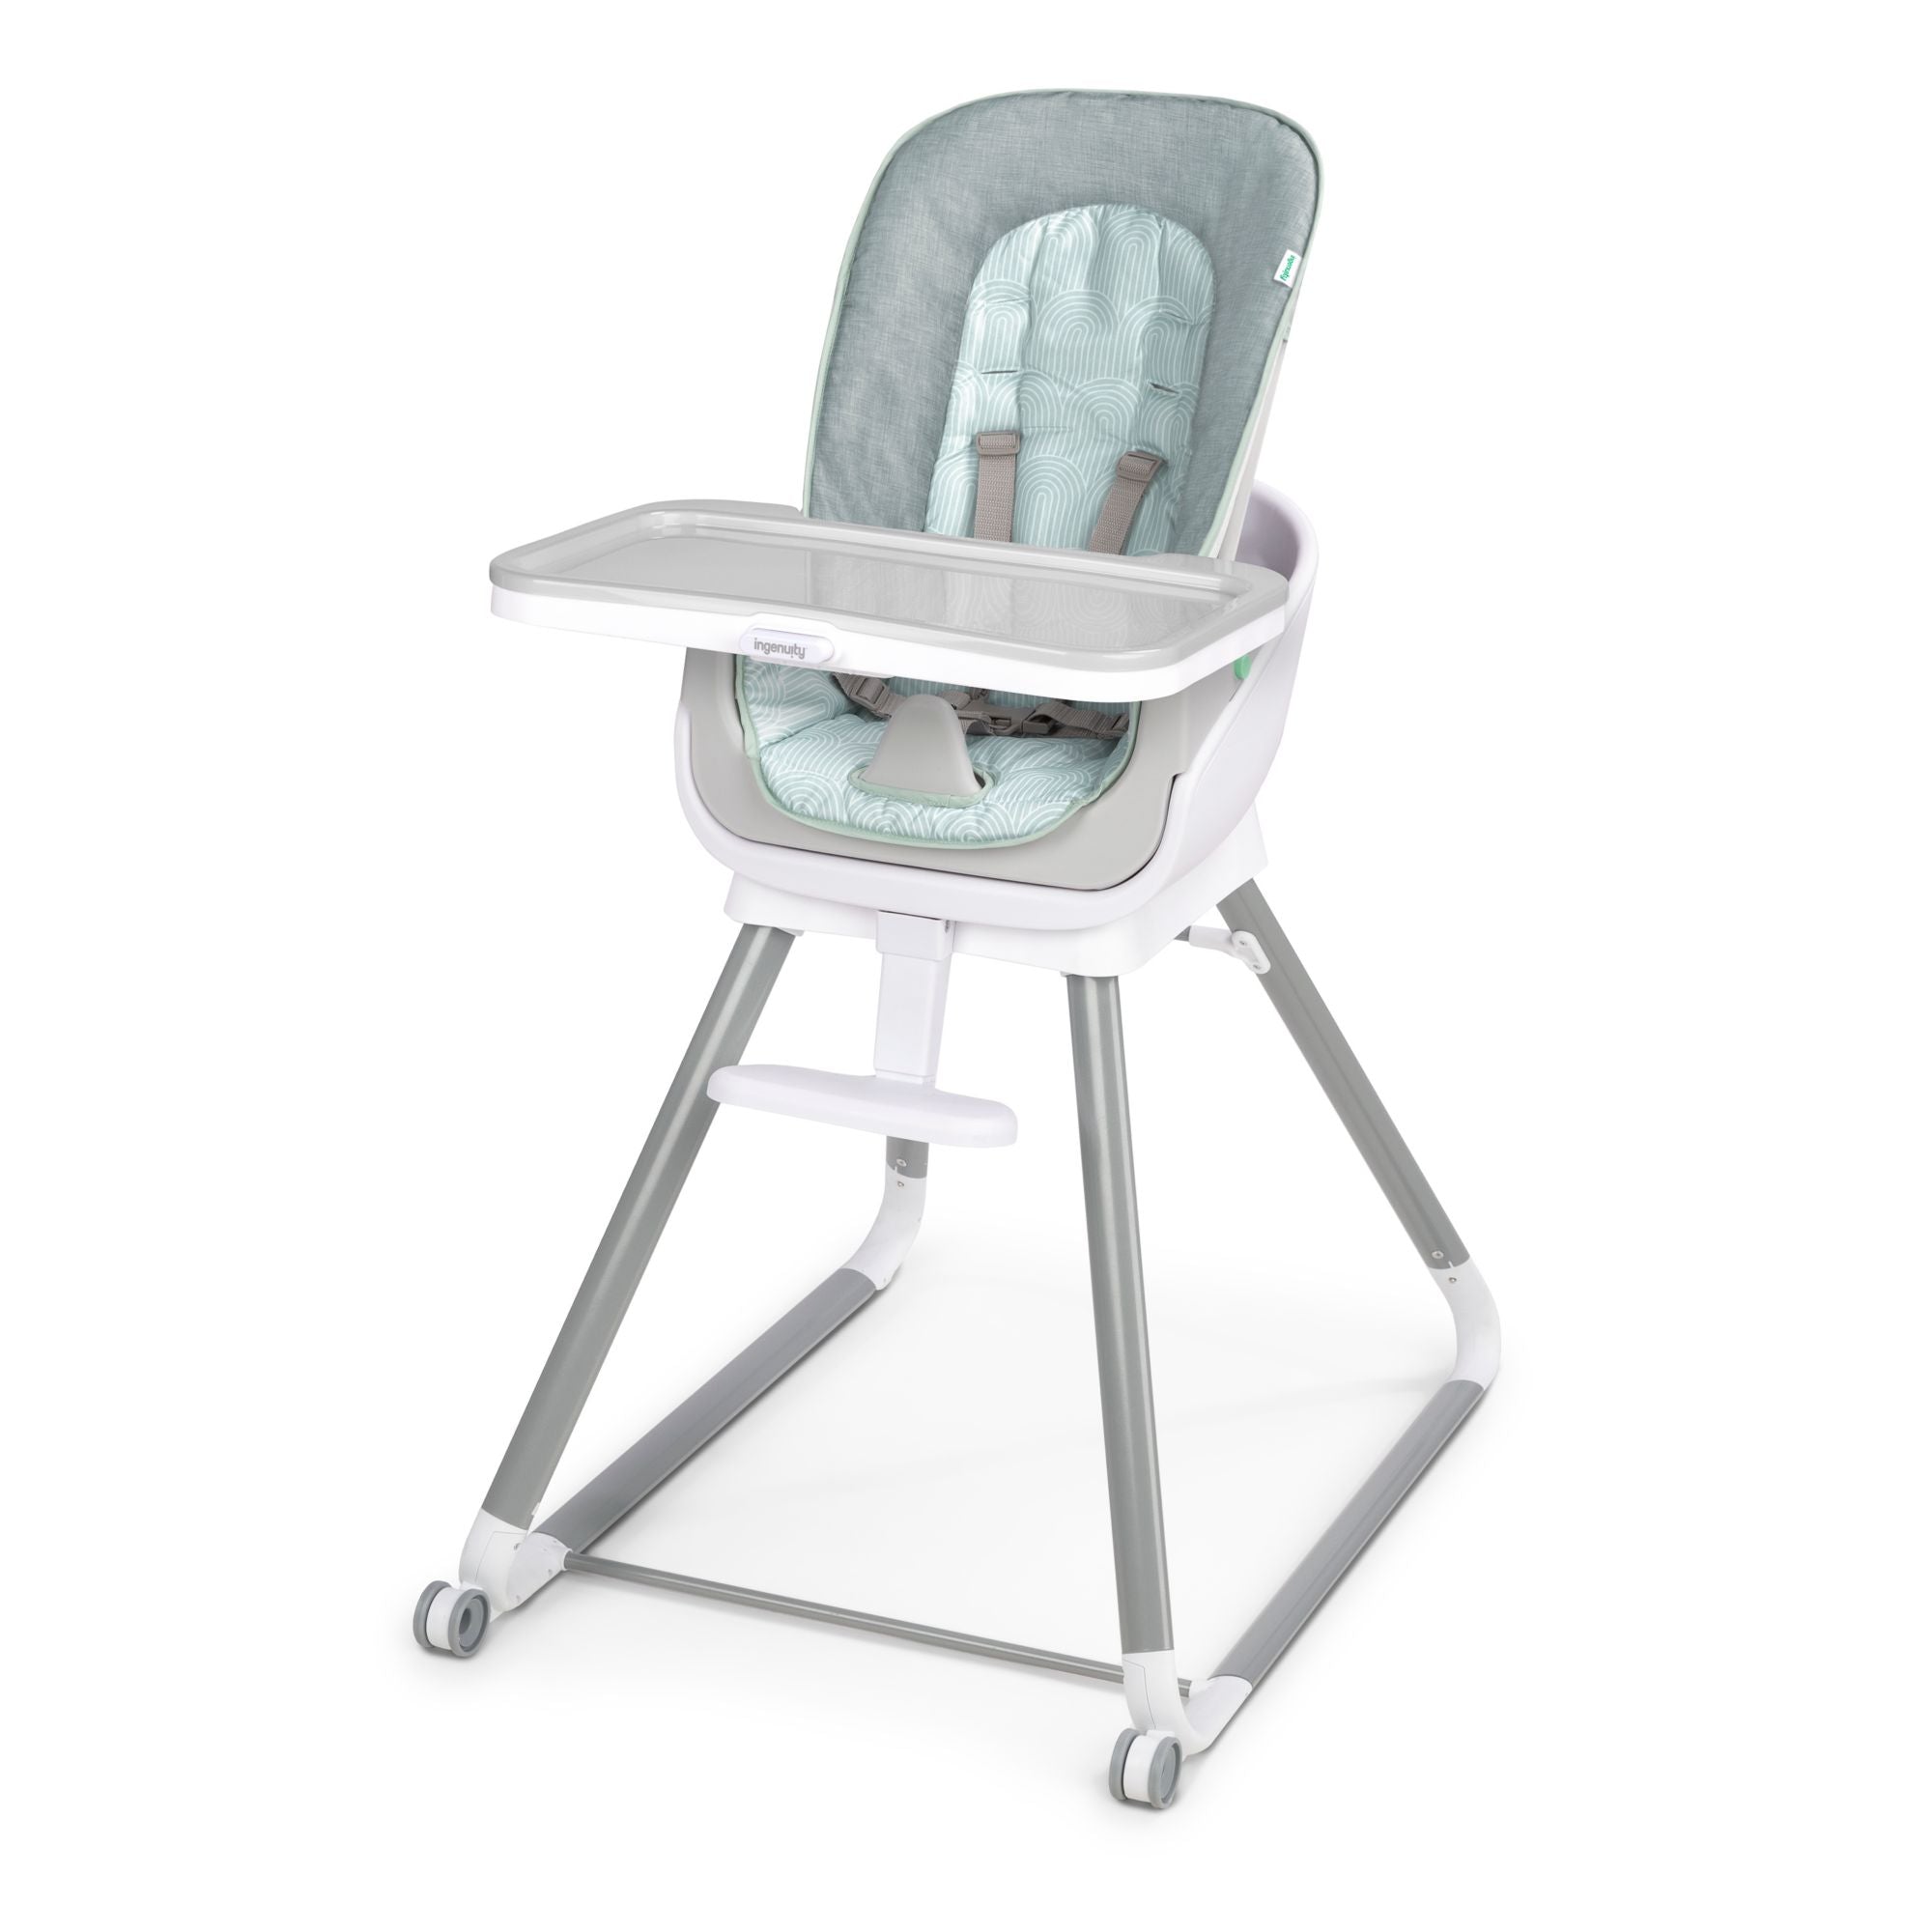 Ingenuity Ity by Simplicity Seat Baby Booster Feeding Chair in Oat